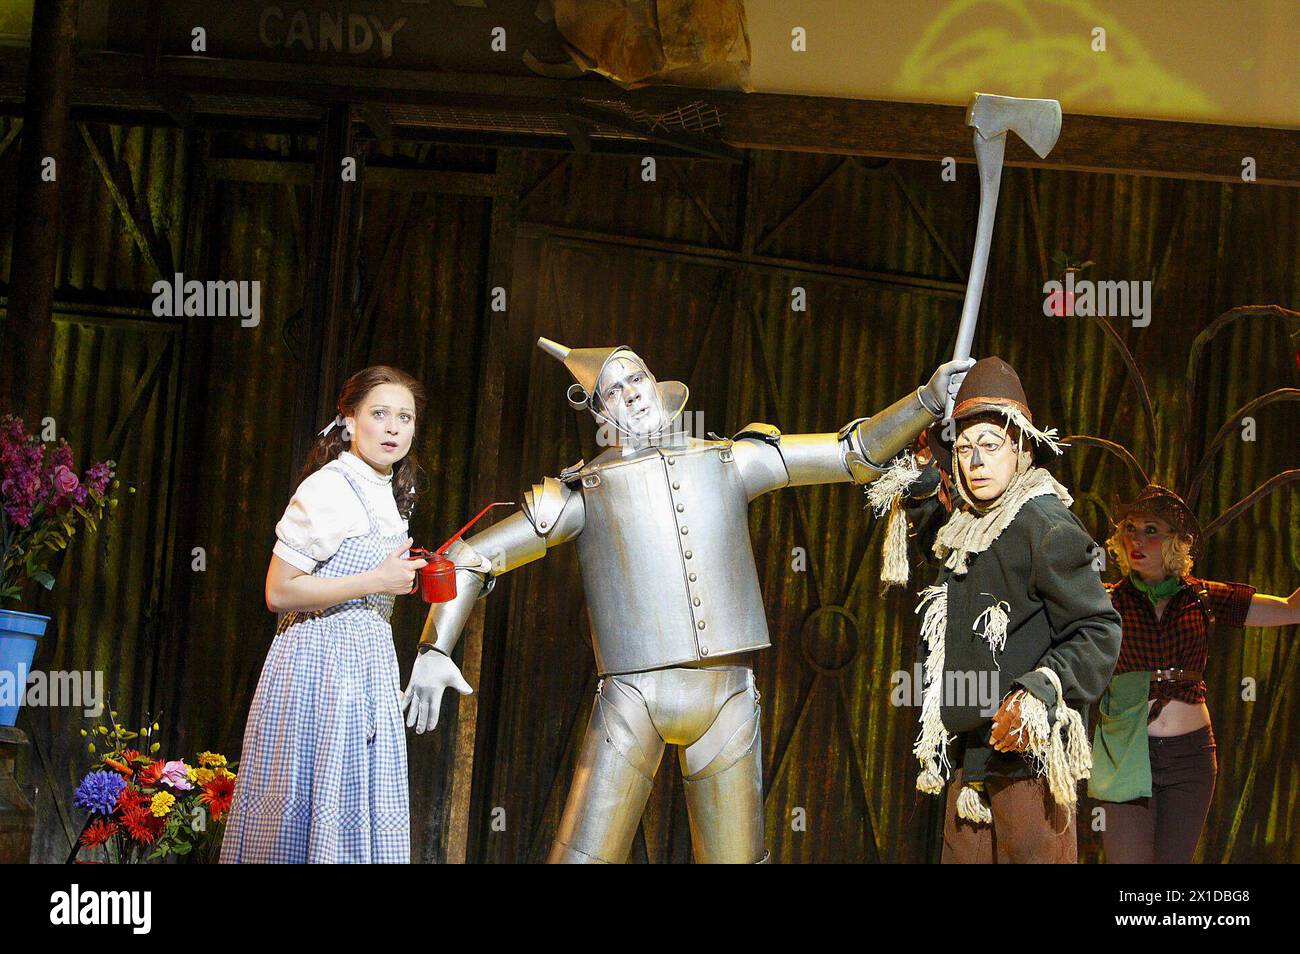 l-r: Sian Brooke (Dorothy Gale), Adam Cooper (Tin Man), Hilton McRae (Scarecrow) in THE WIZARD OF OZ at the Royal Festival Hall, Southbank Centre, London SE1  29/07/2008 after the novel by by L. Frank Baum  music & lyrics: Harold Arlen & E. Y. Harburg   adapted by John Kane for the RSC  design: Michael Vale  lighting: Mike Gunning  choreography: Nick Winston  director: Jude Kelly Stock Photo